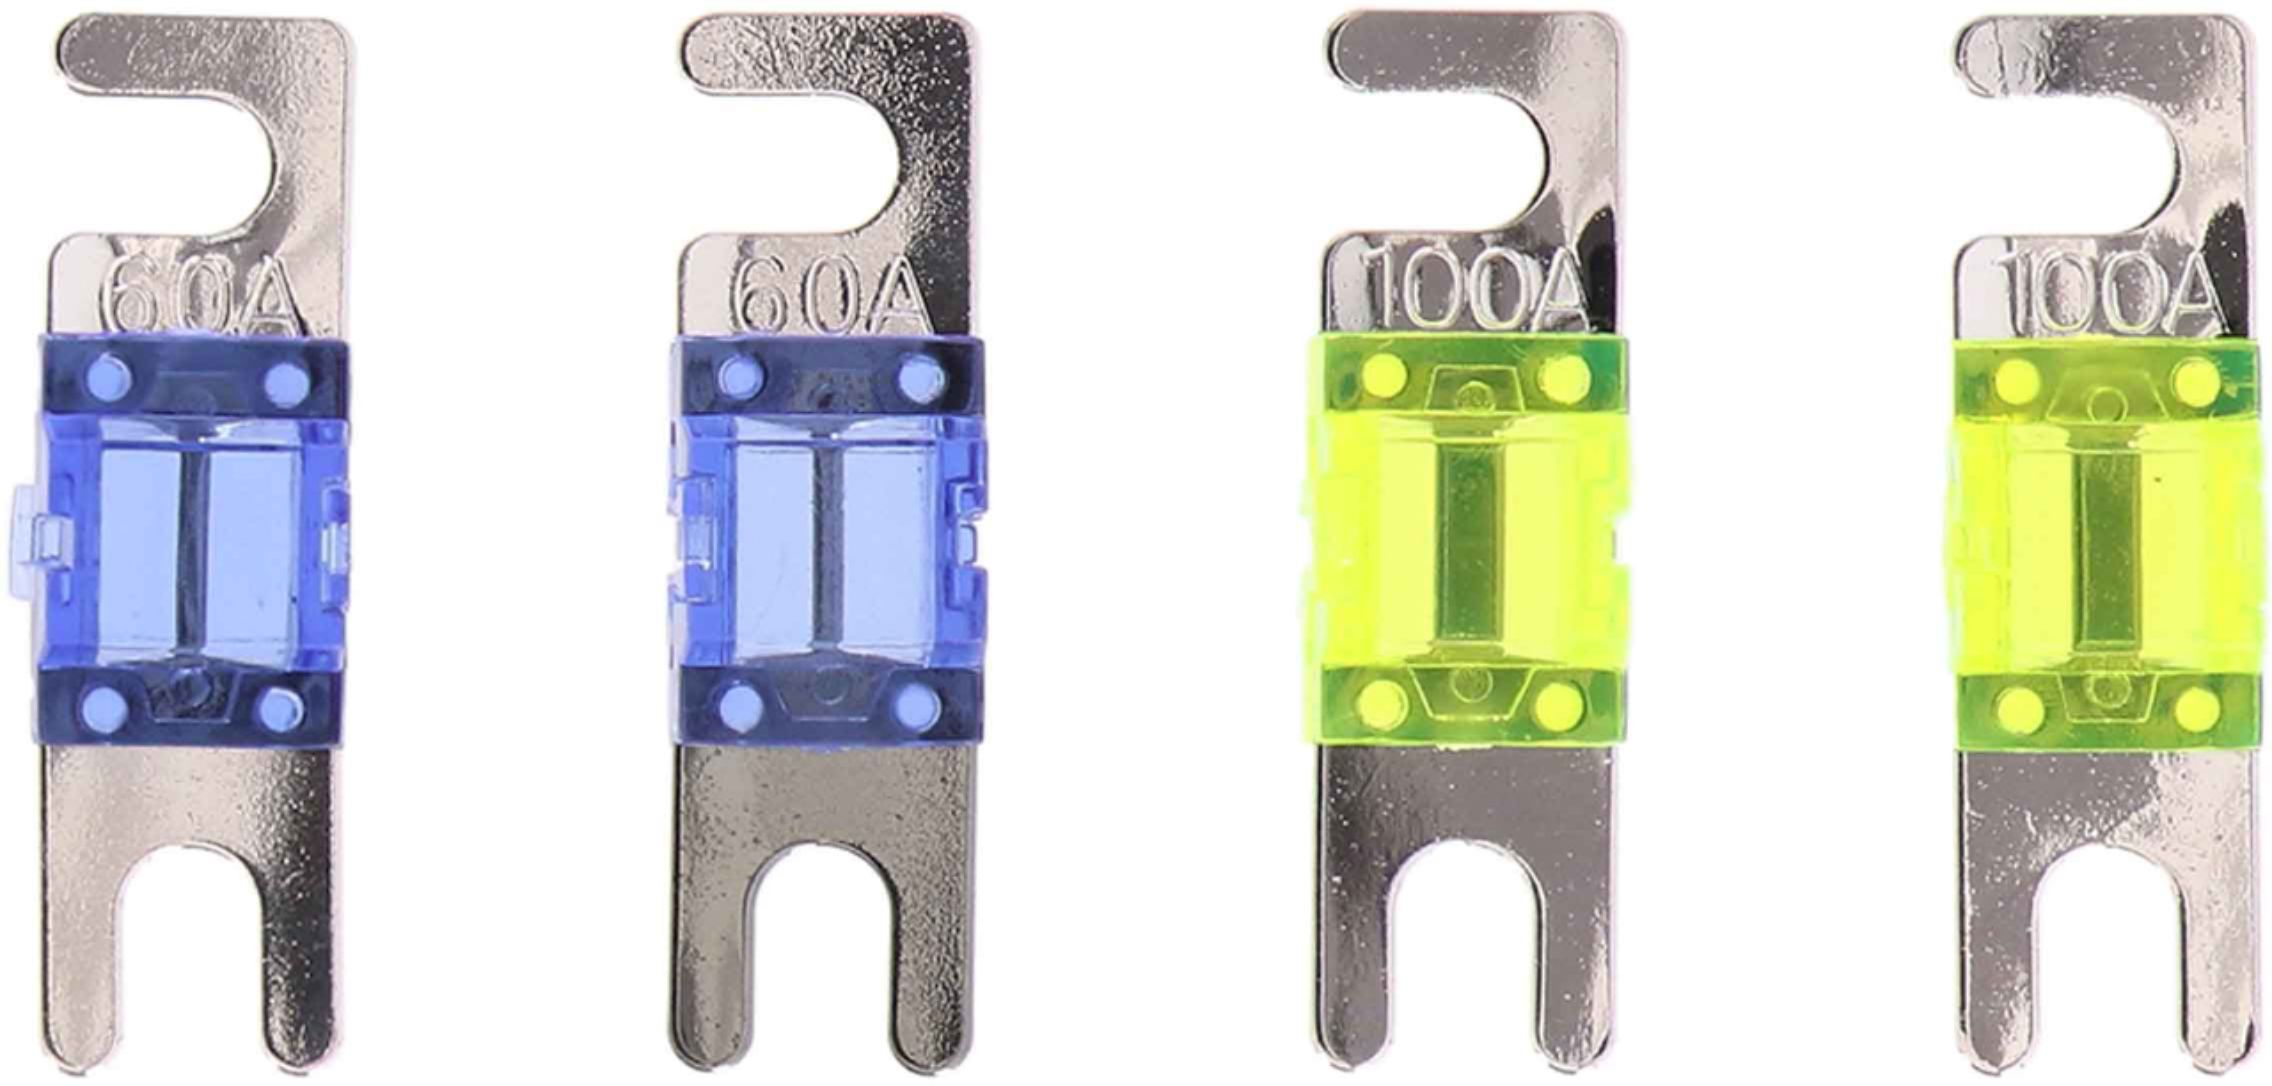 Metra - 60- and 100-amp AFS Fuse - (4-Pack) - Gray